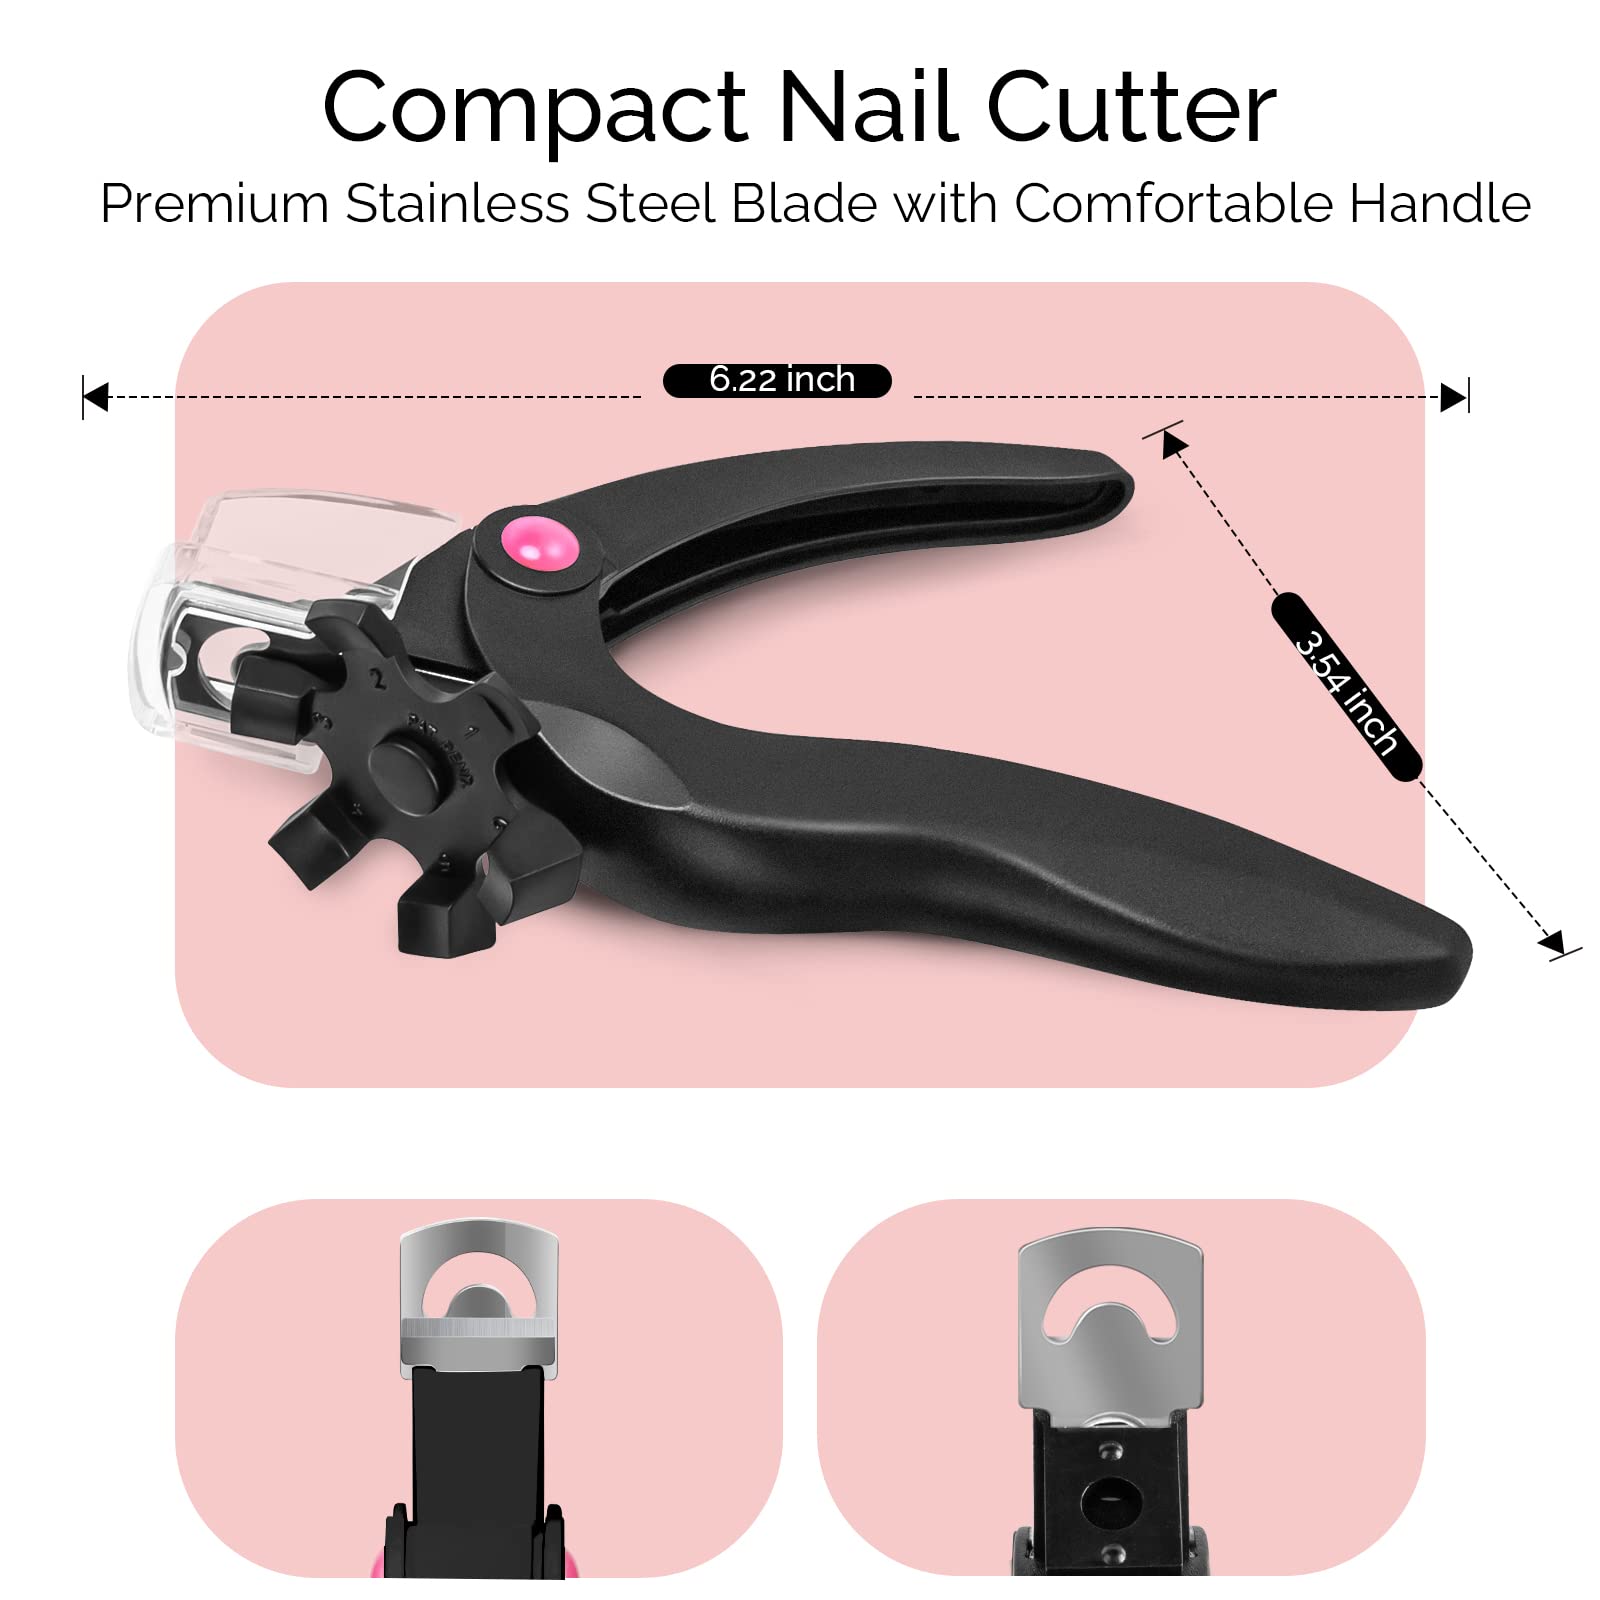 Amazon.com : Dog Nail Clippers and Trimmer by Boshel - with Safety Guard to  Avoid Over-Cutting Nails & Free Nail File - Razor Sharp Blades - Sturdy Non  Slip Handles - for